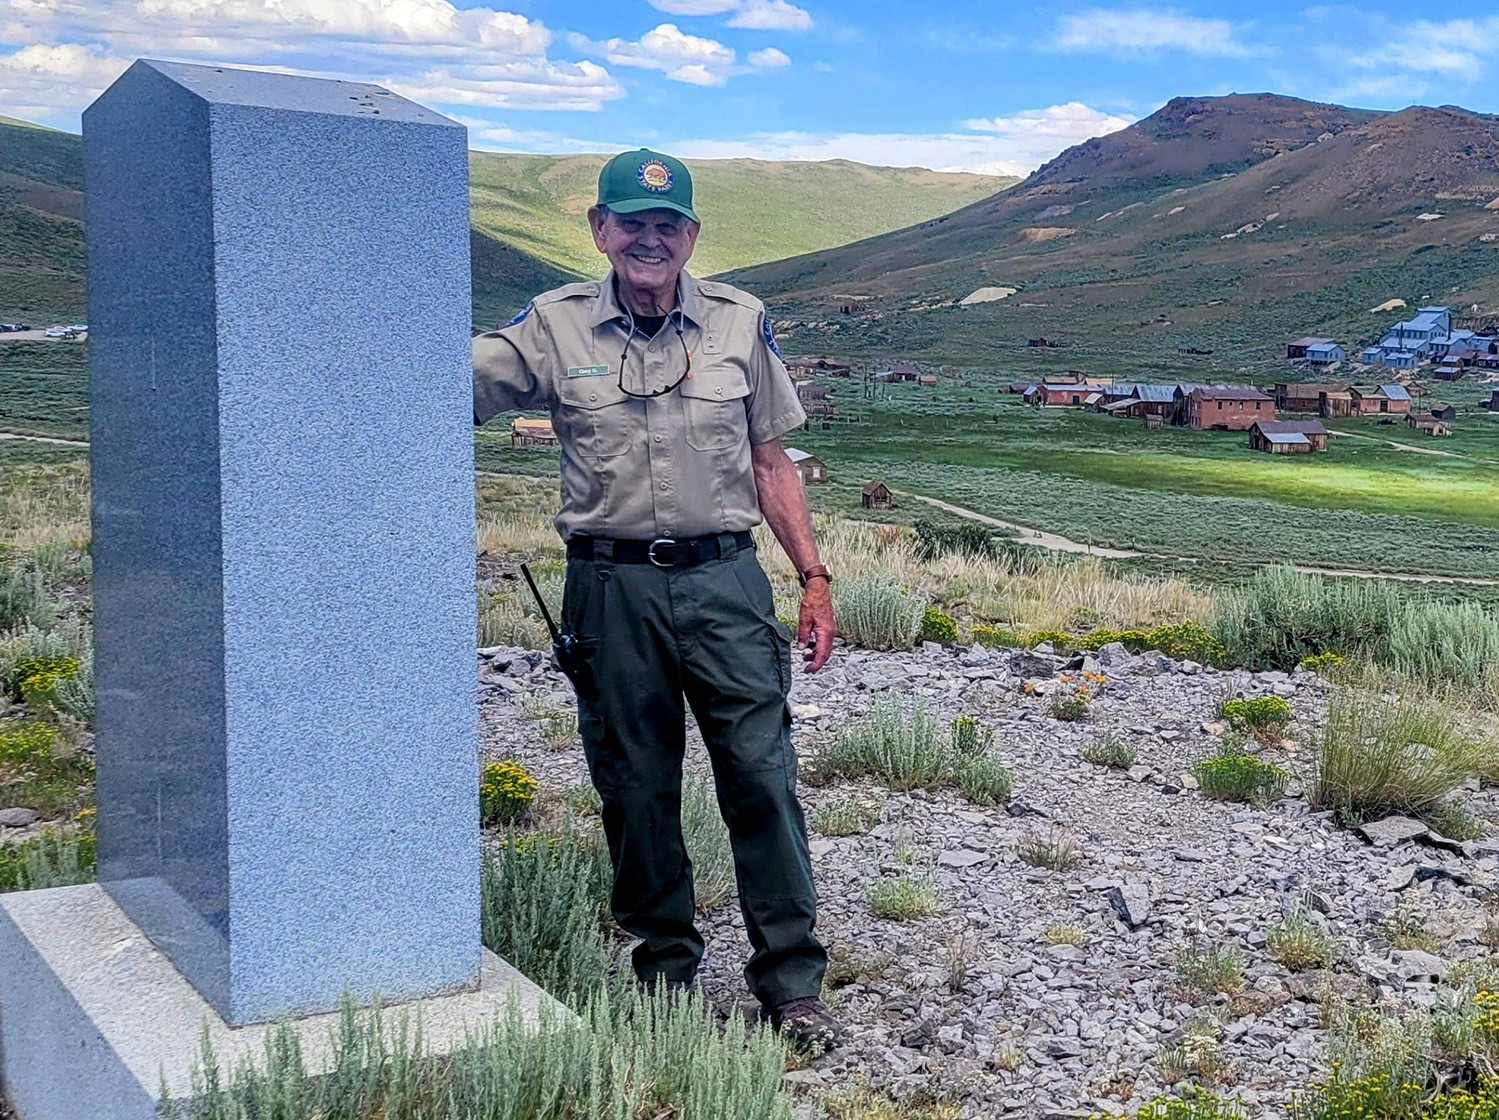 Gary Staab is a State Park aide in Bodie